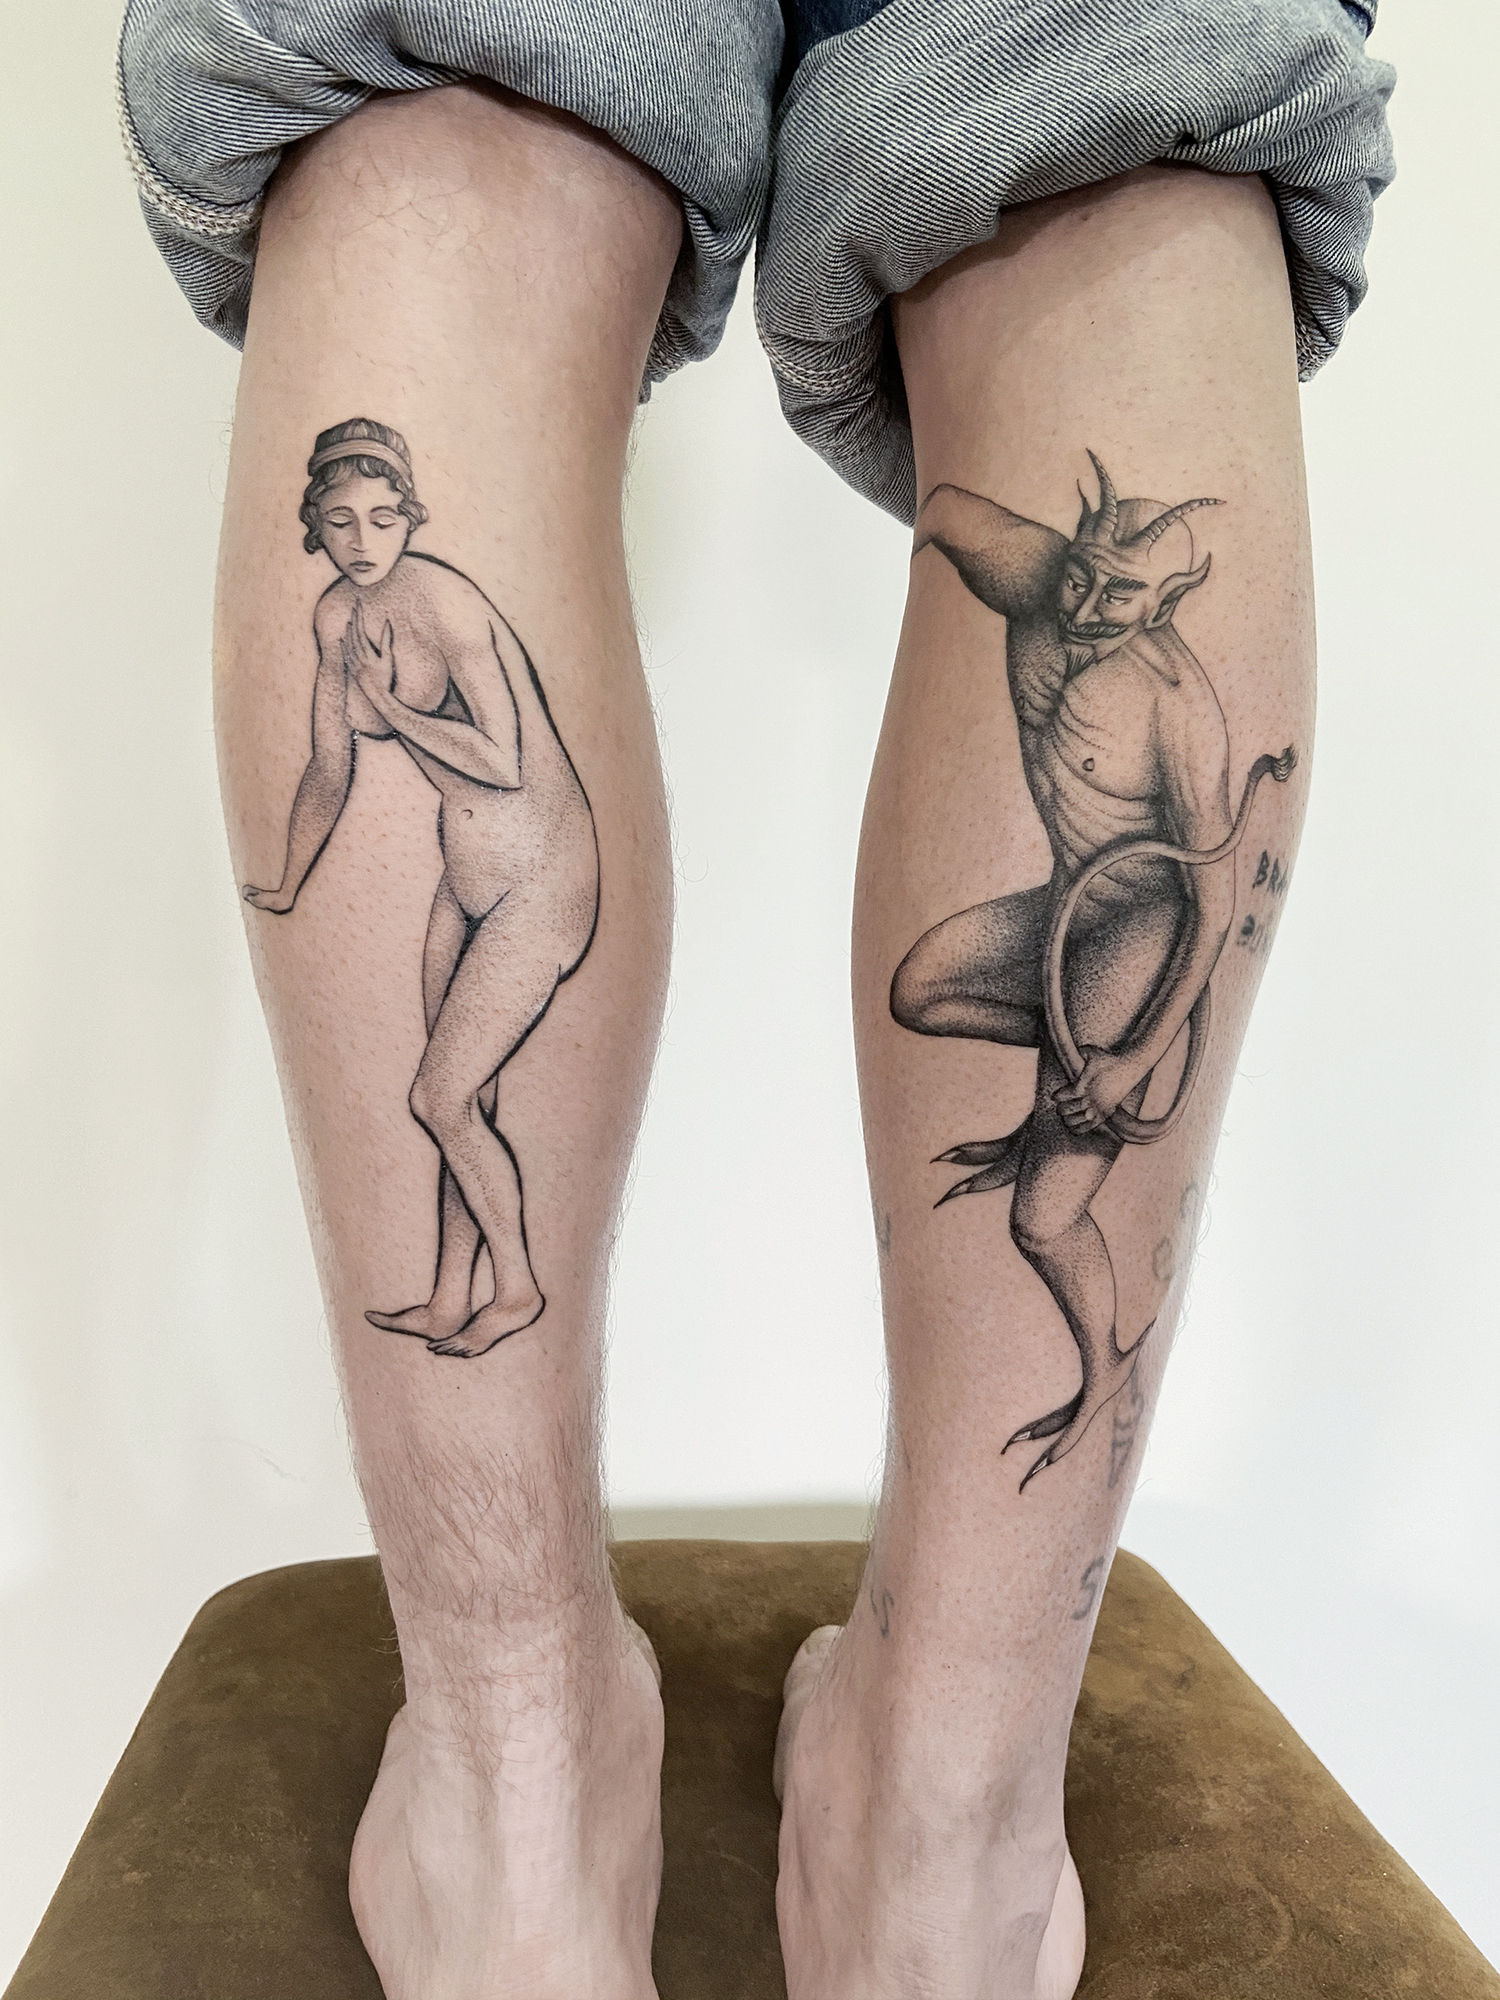 woman and devil tattoo on legs by delphin muquet